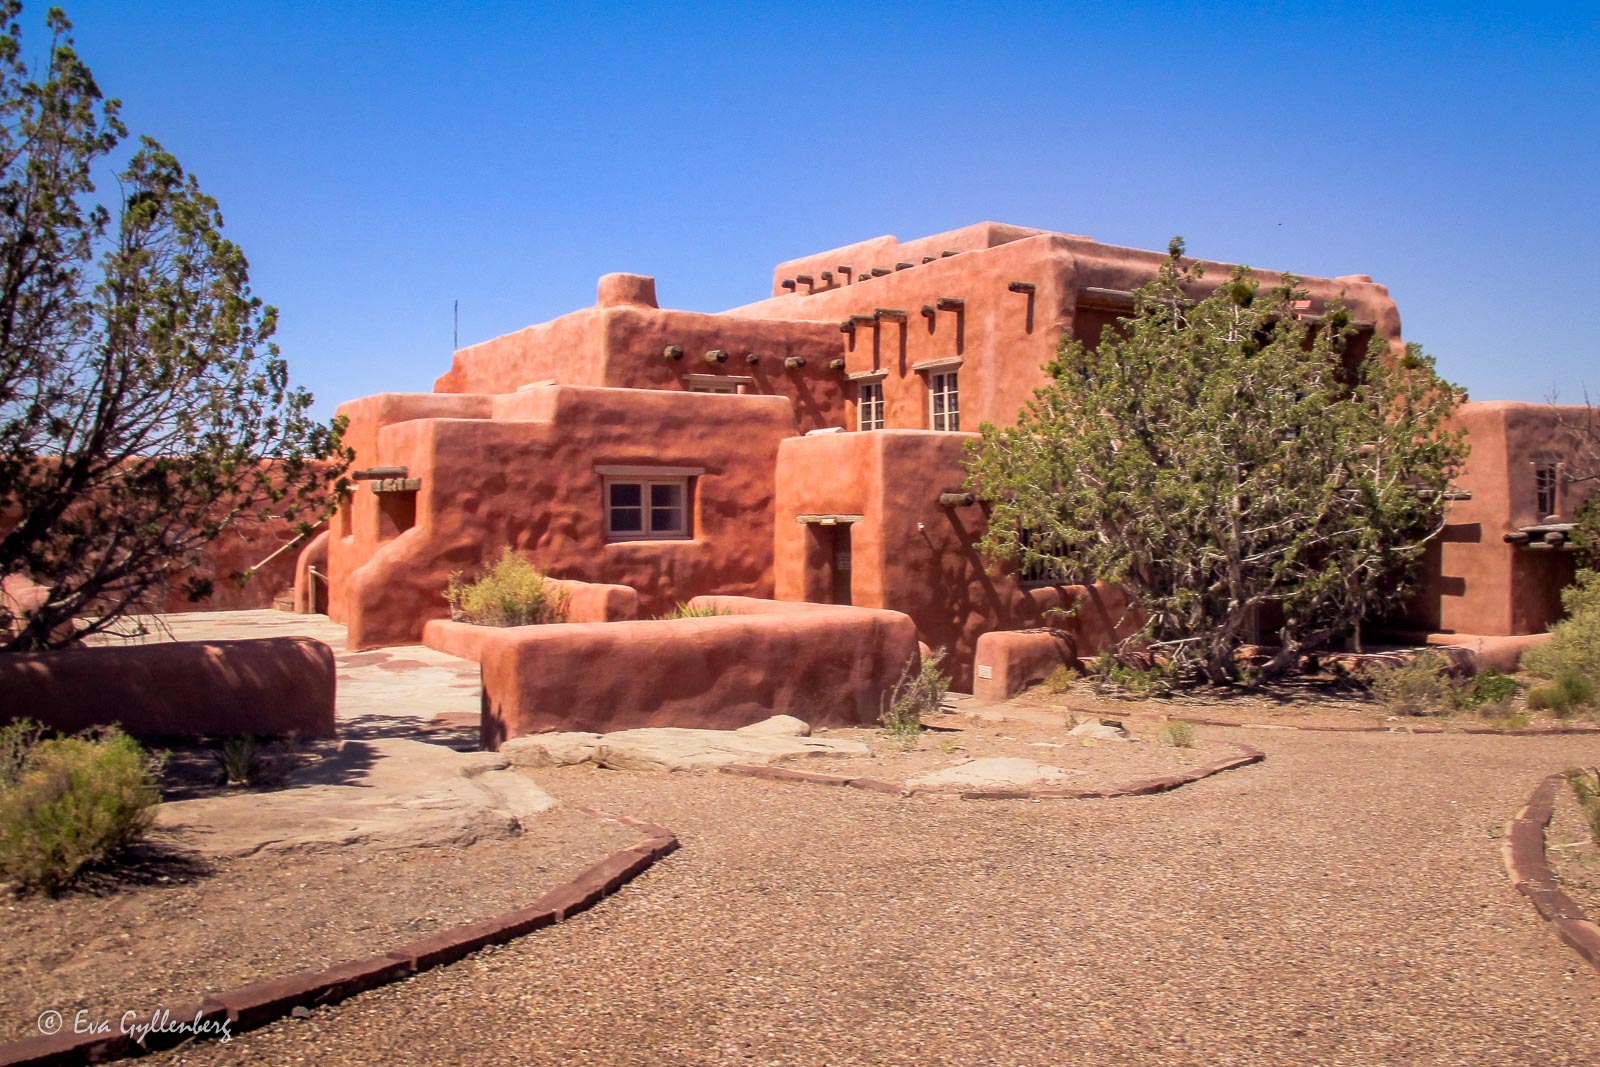 House in the Petrified Forest